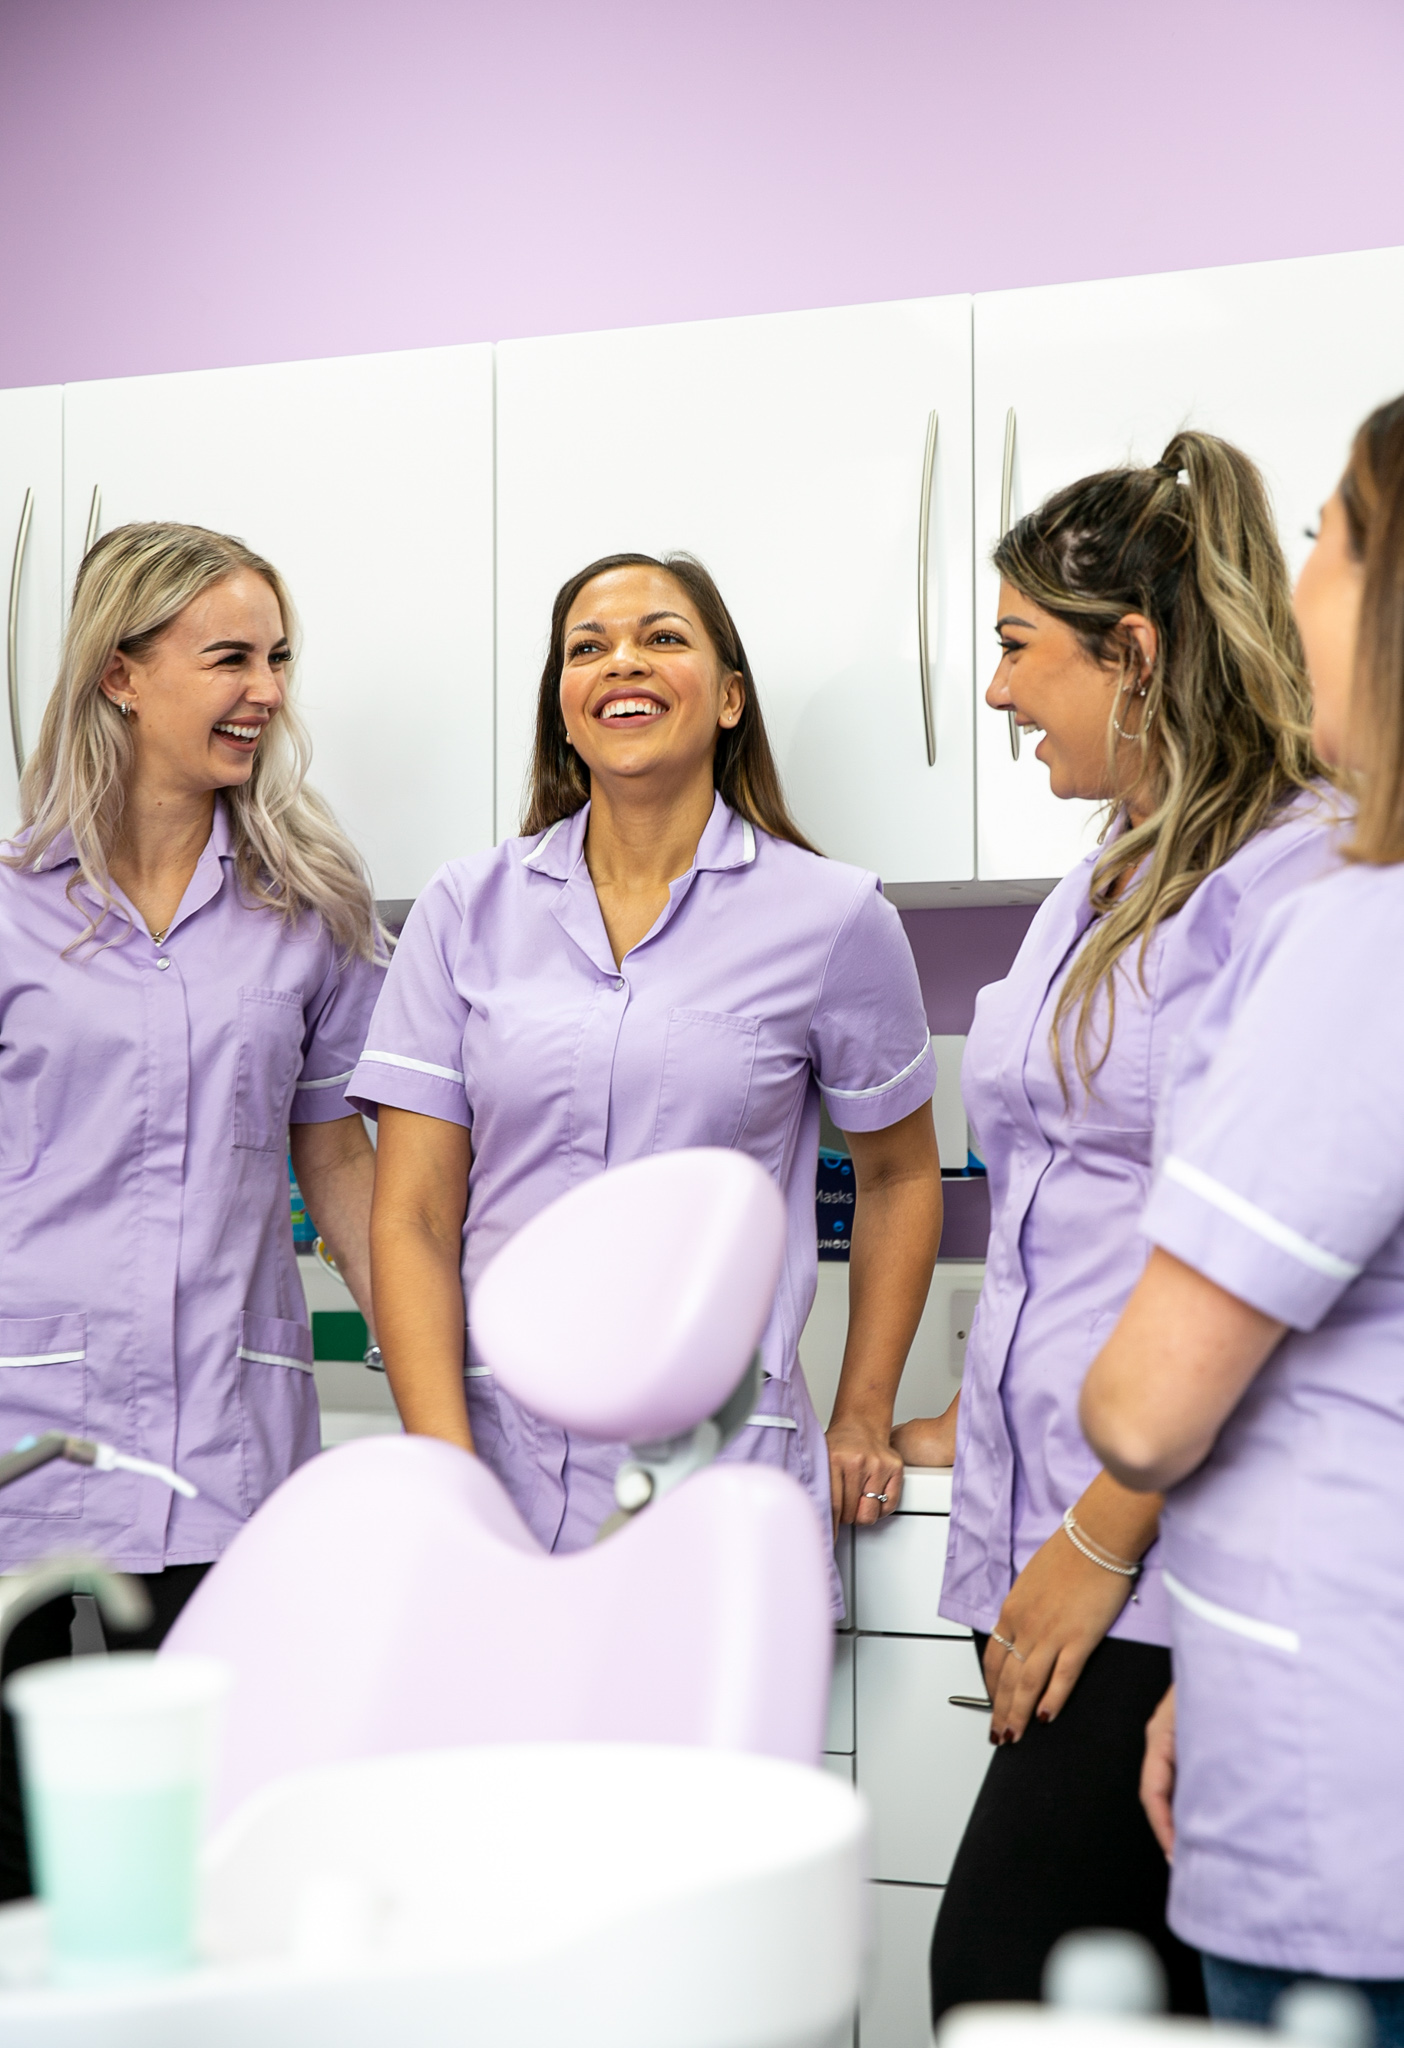 REIGATE SMILES WELCOME FRIENDLY DENTISTS SURREY LOCAL PRIVATE DENTISTRY